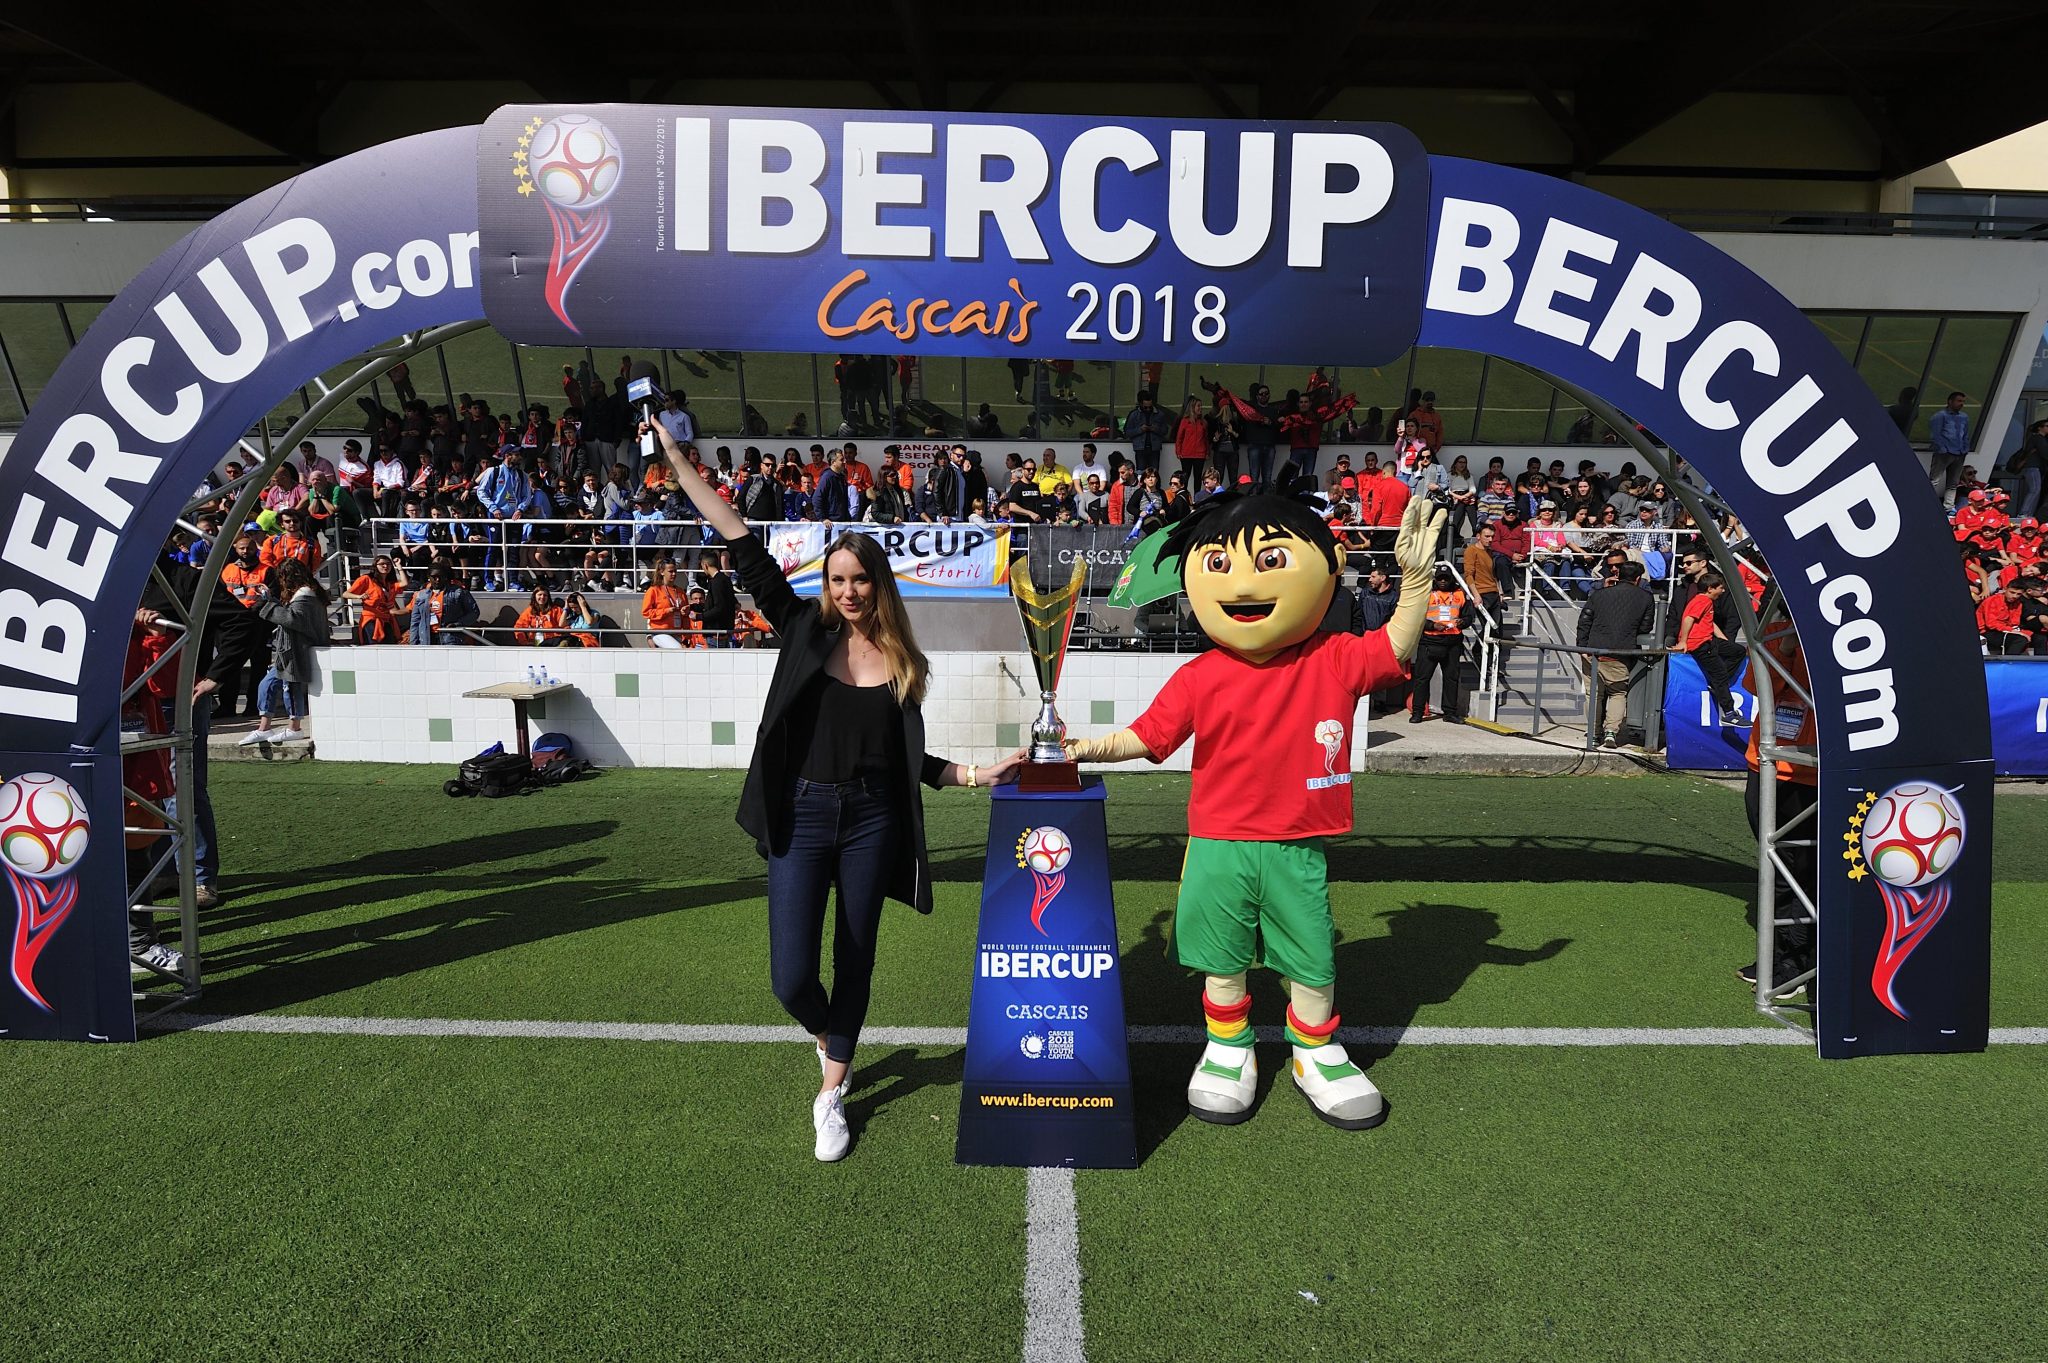 IberCup Cascais - journalist-mascot-cup - Road to Sport